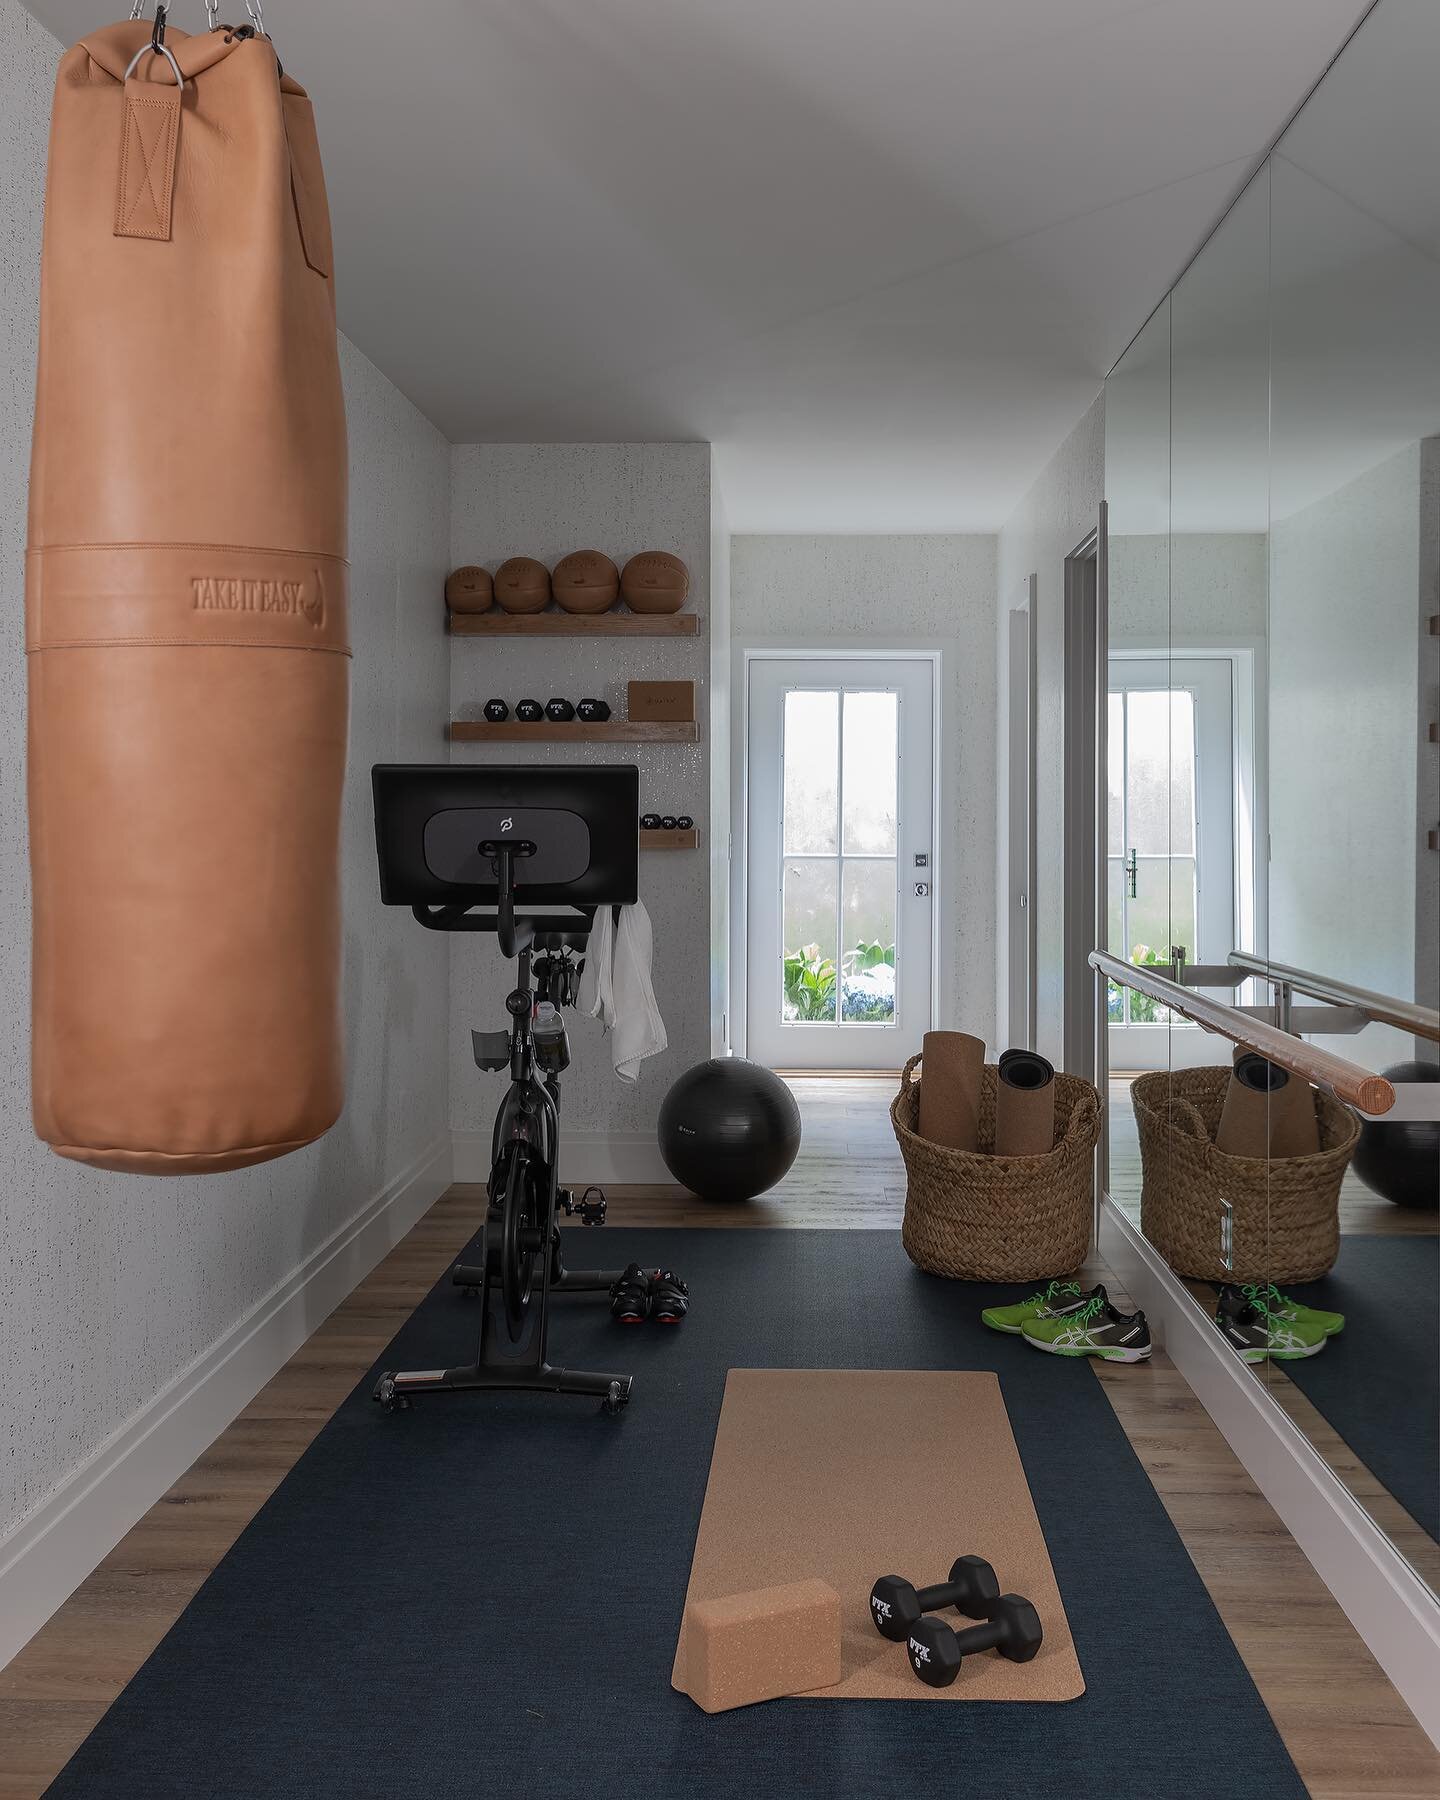 We think this home gym is a total knockout 🥊

📸 by @michaeljleephotography

.
.
.

#nancyhillinteriors #nancyhill #nhi #interiordesign #interiordecorating #interiordesigner #interiordecor #interior #interiors #design #decor #homedecor #home #homegy